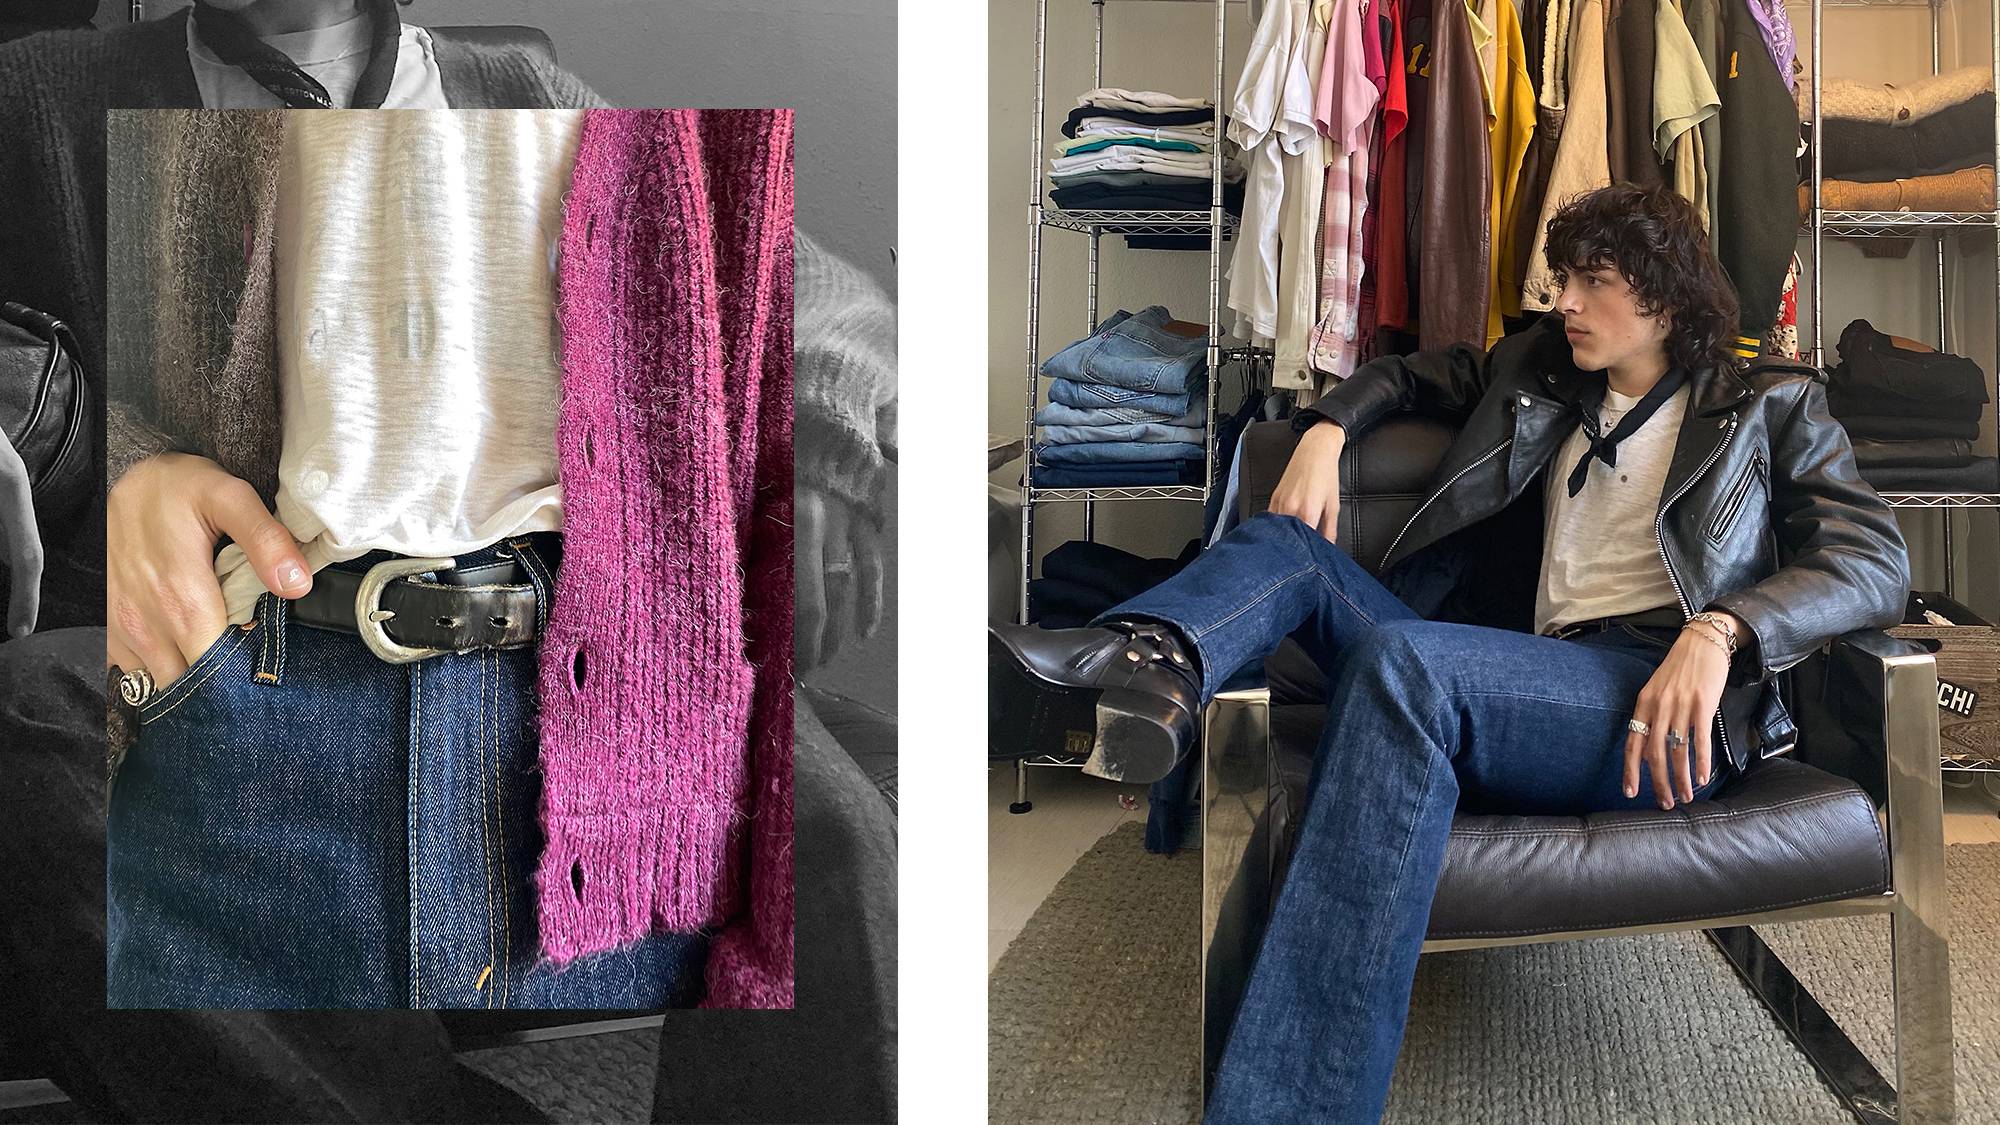 A close up shot of jeans and a purple scarf and someone sitting in a chair wearing a leather jacket and jeans